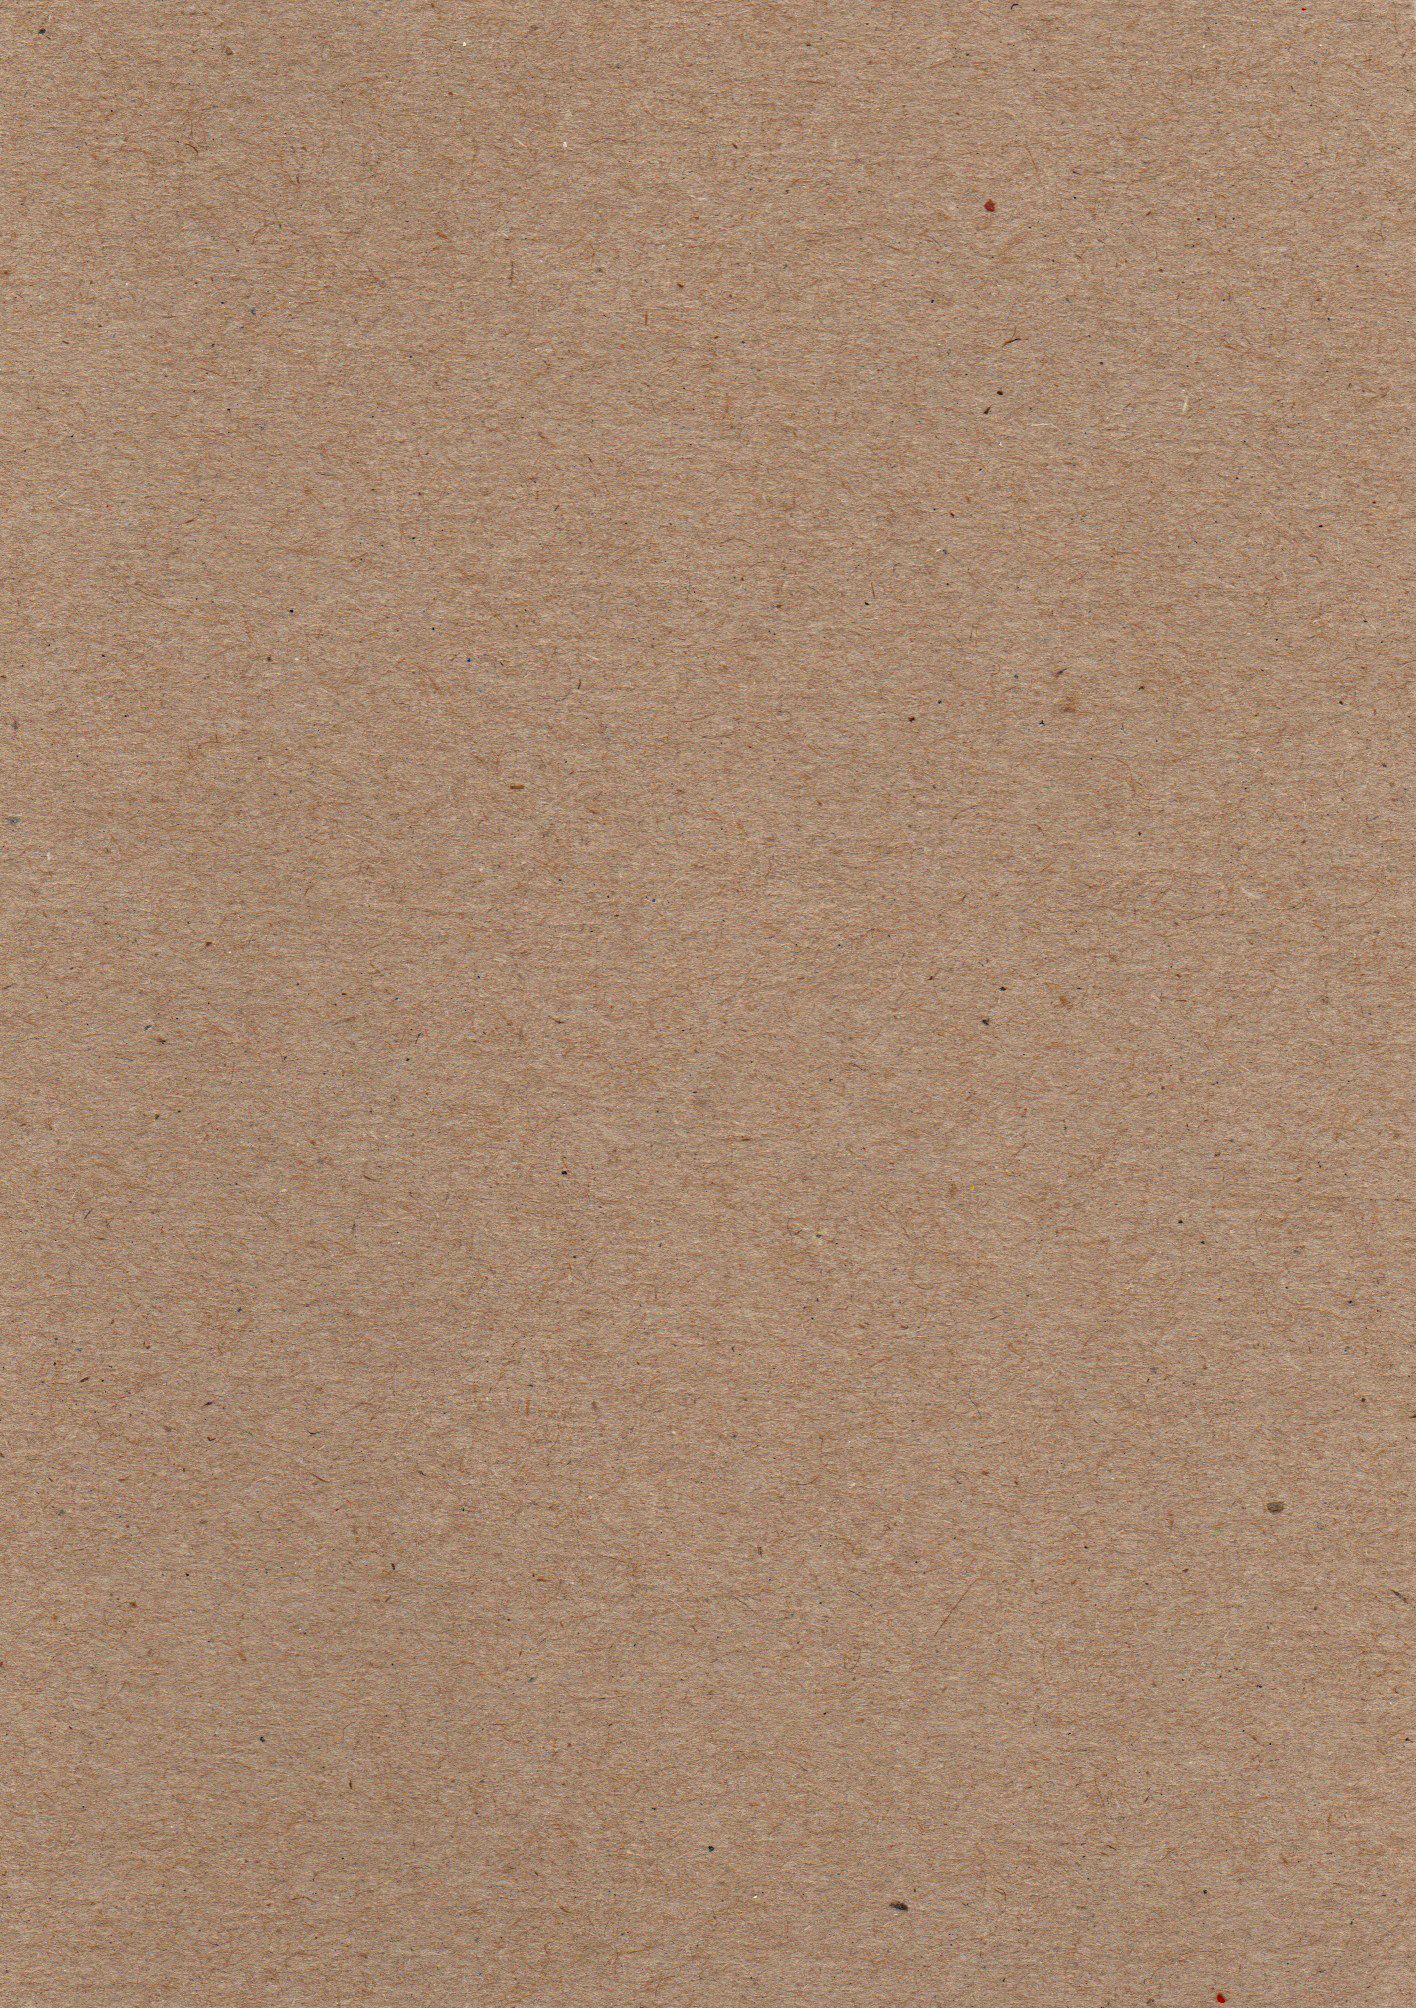 Free High Resolution Textures - Lost and Taken - 15 Brown Paper ...